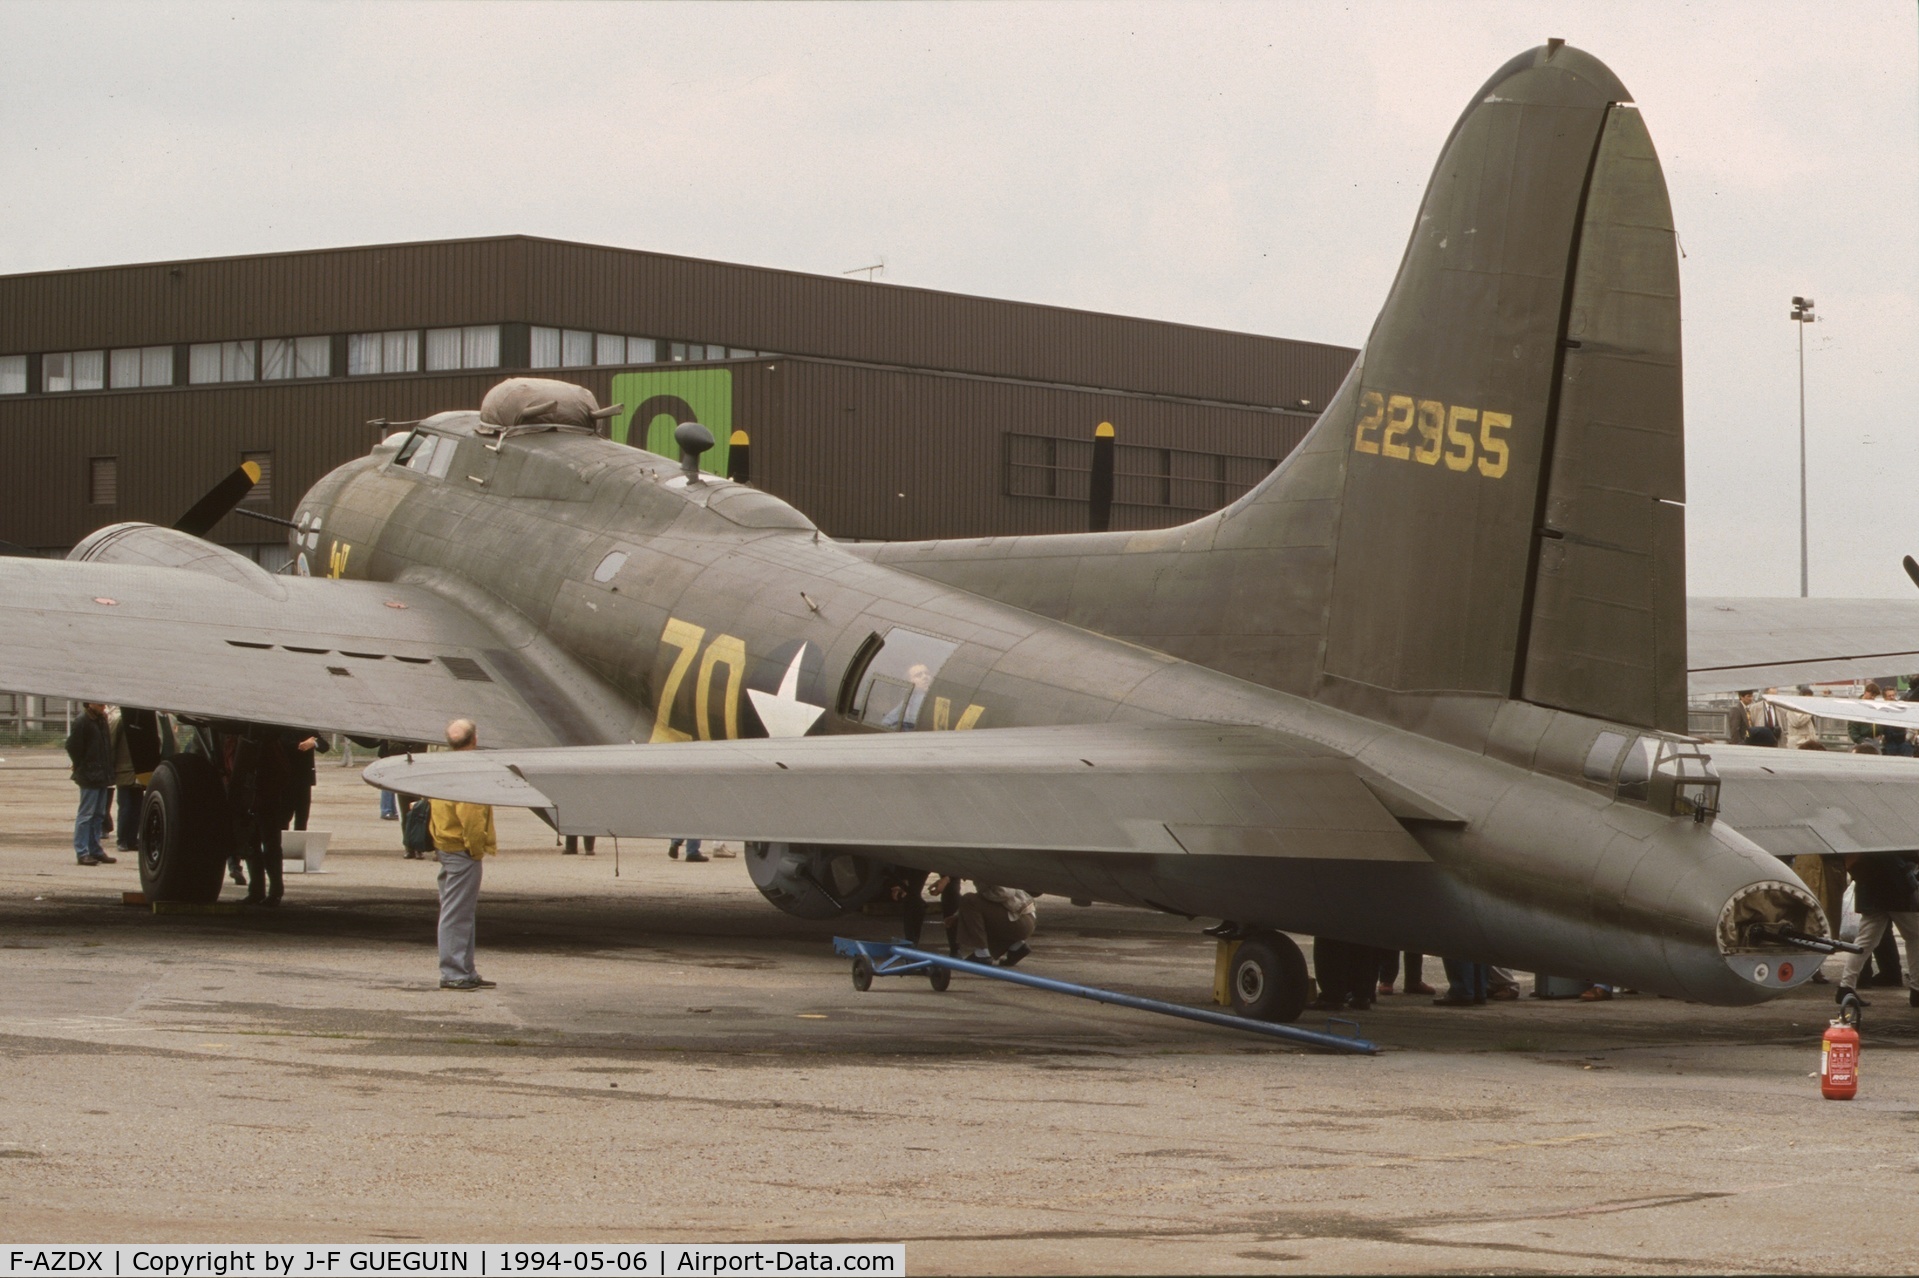 F-AZDX, 1944 Boeing B-17G Flying Fortress C/N 8246, On display at Paris-Le Bourget Airport (1er Salon de l'Aviation Ancienne, 1994), painted with serial 22955/code ZQ-X on left side and serial 122960/code G-DF on right side.